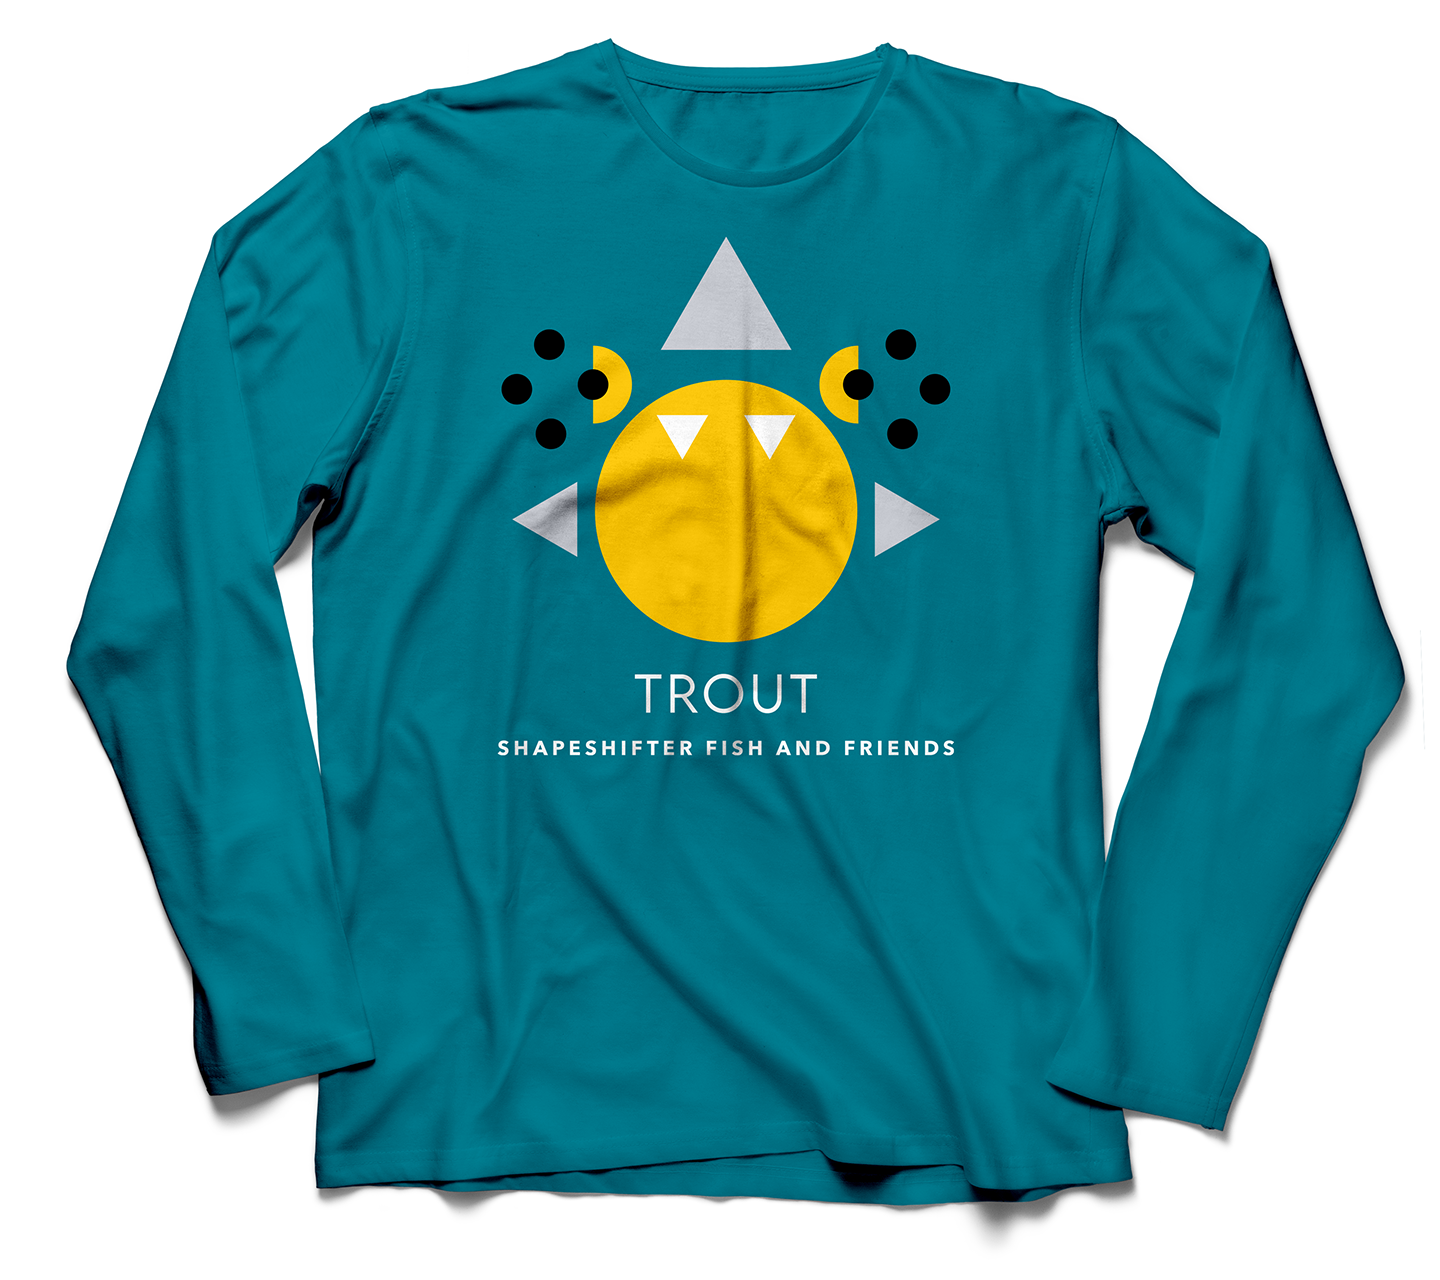 Teal Trout Youth Long Sleeve Shirt - ShapeShifter Fish and Friends